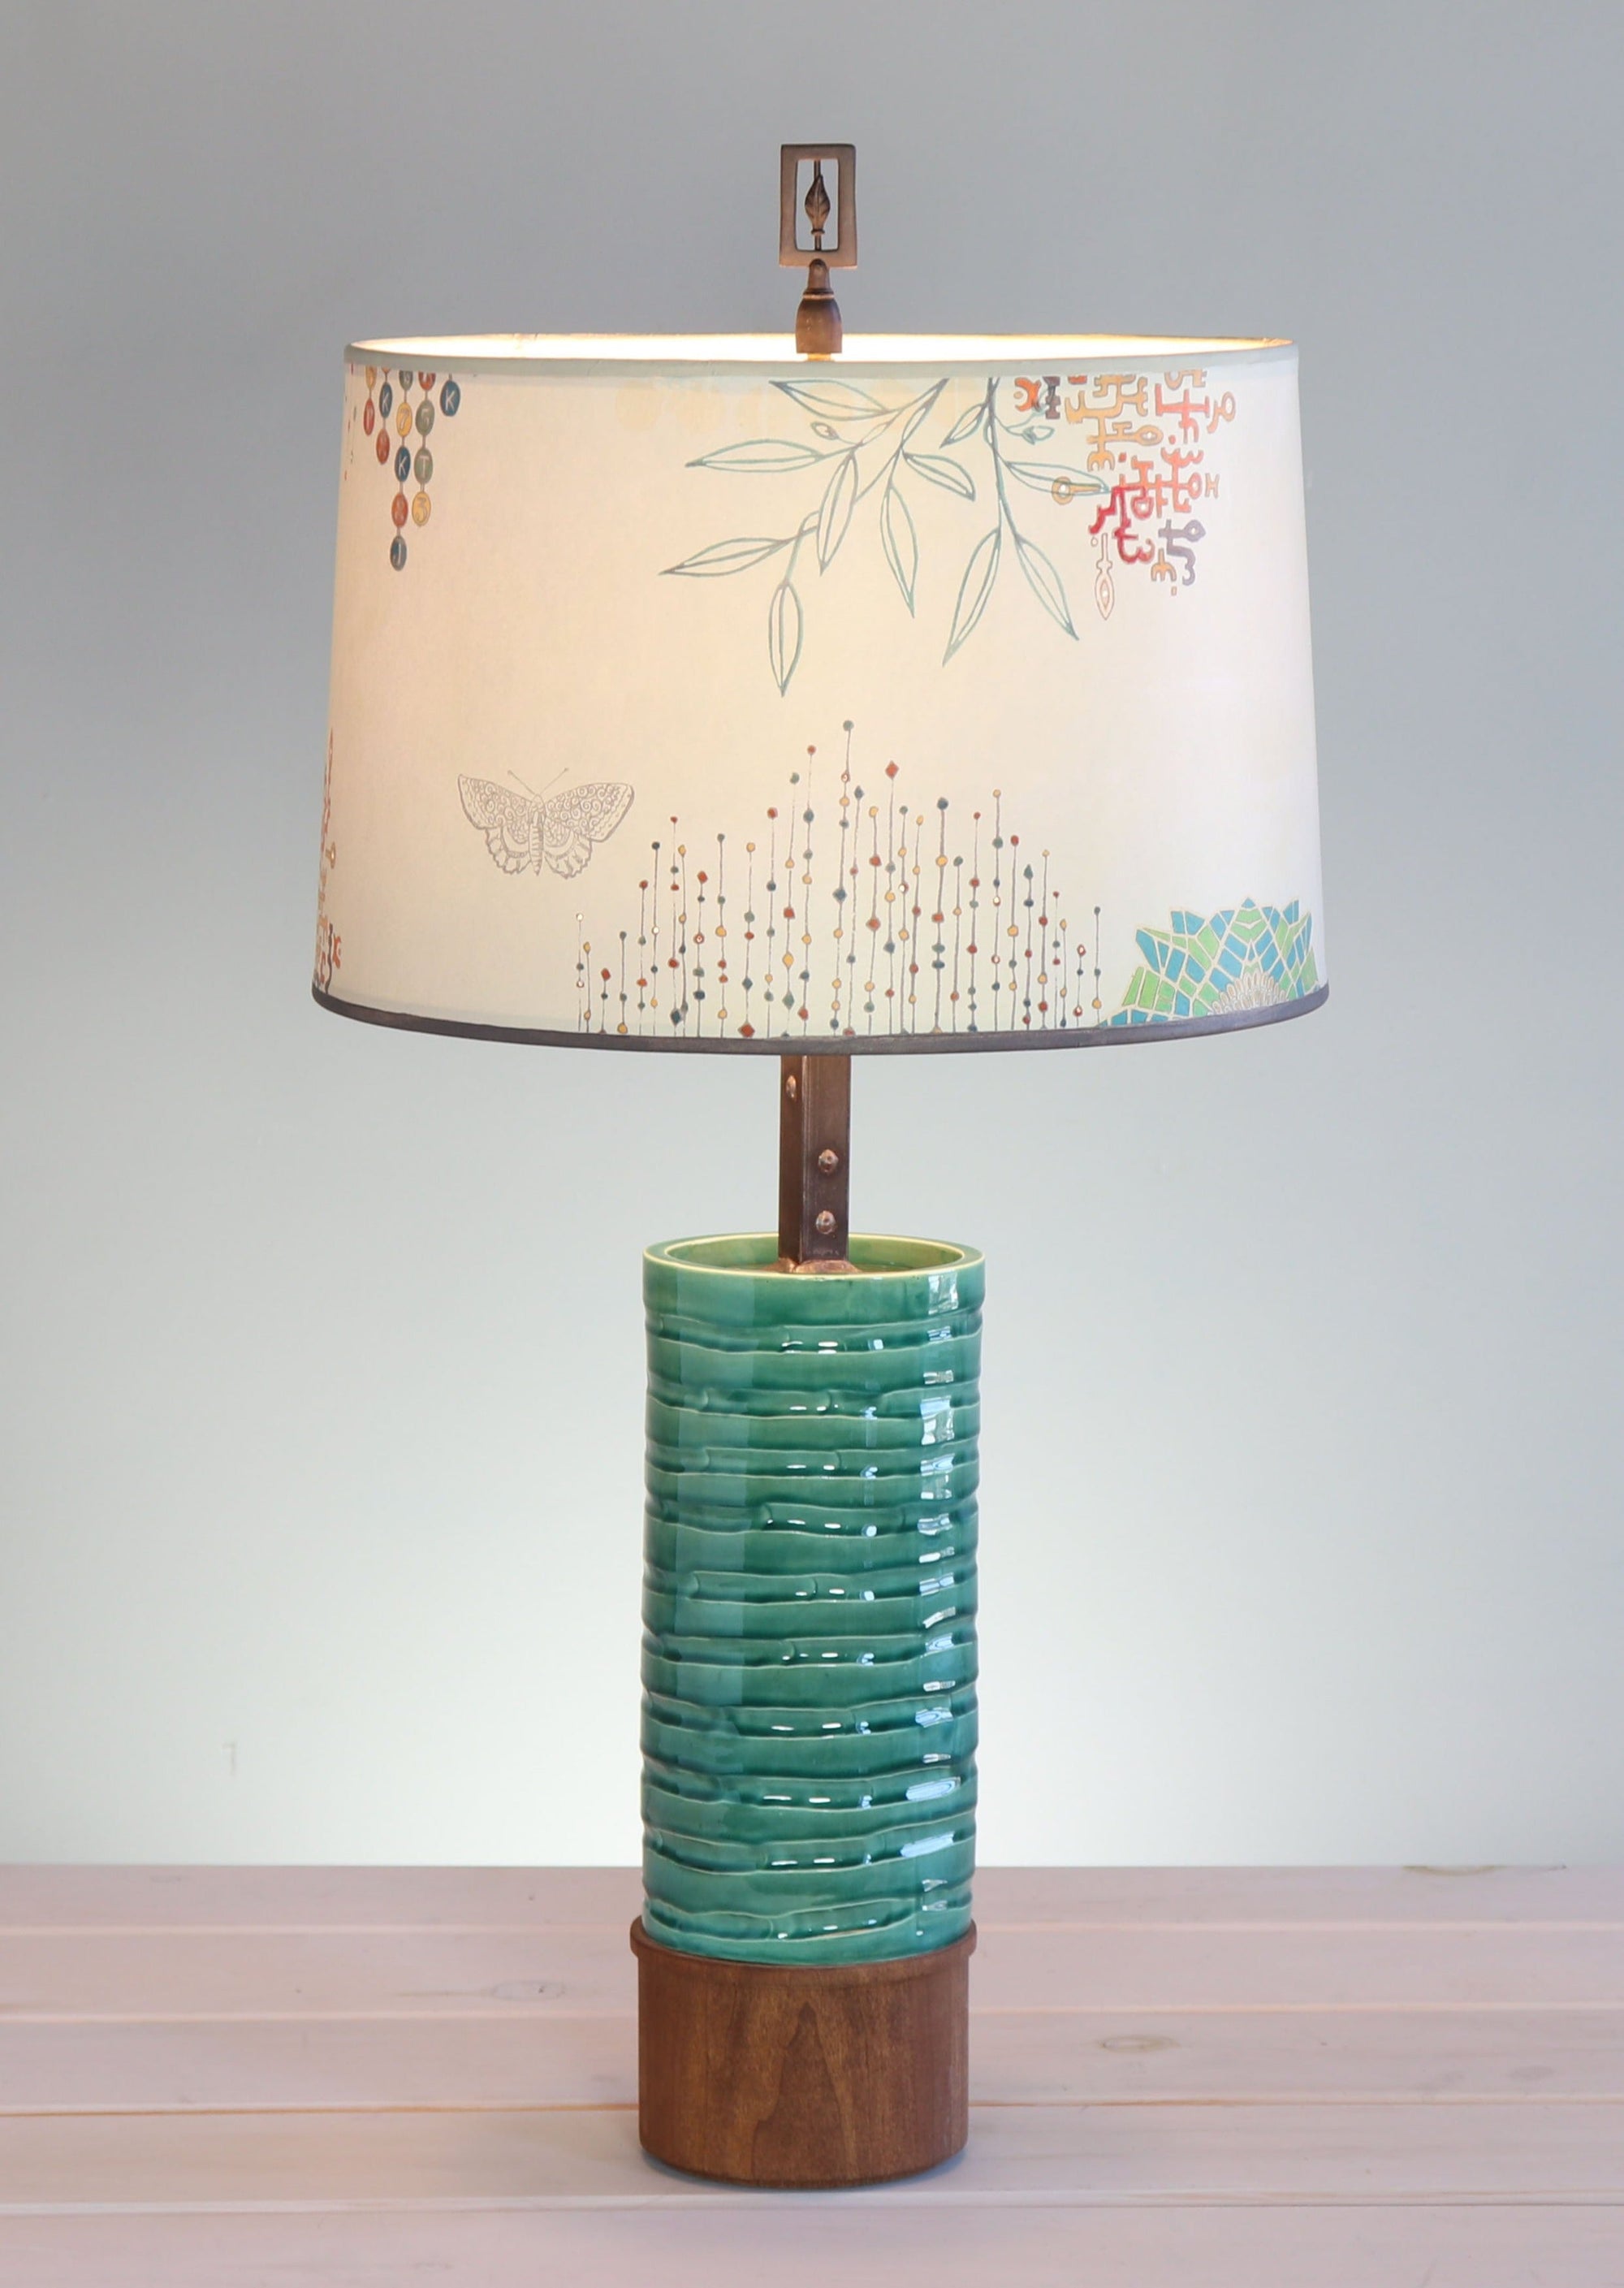 Janna Ugone & Co Table Lamps Ceramic and Wood Table Lamp with Large Drum Shade in Ecru Journey